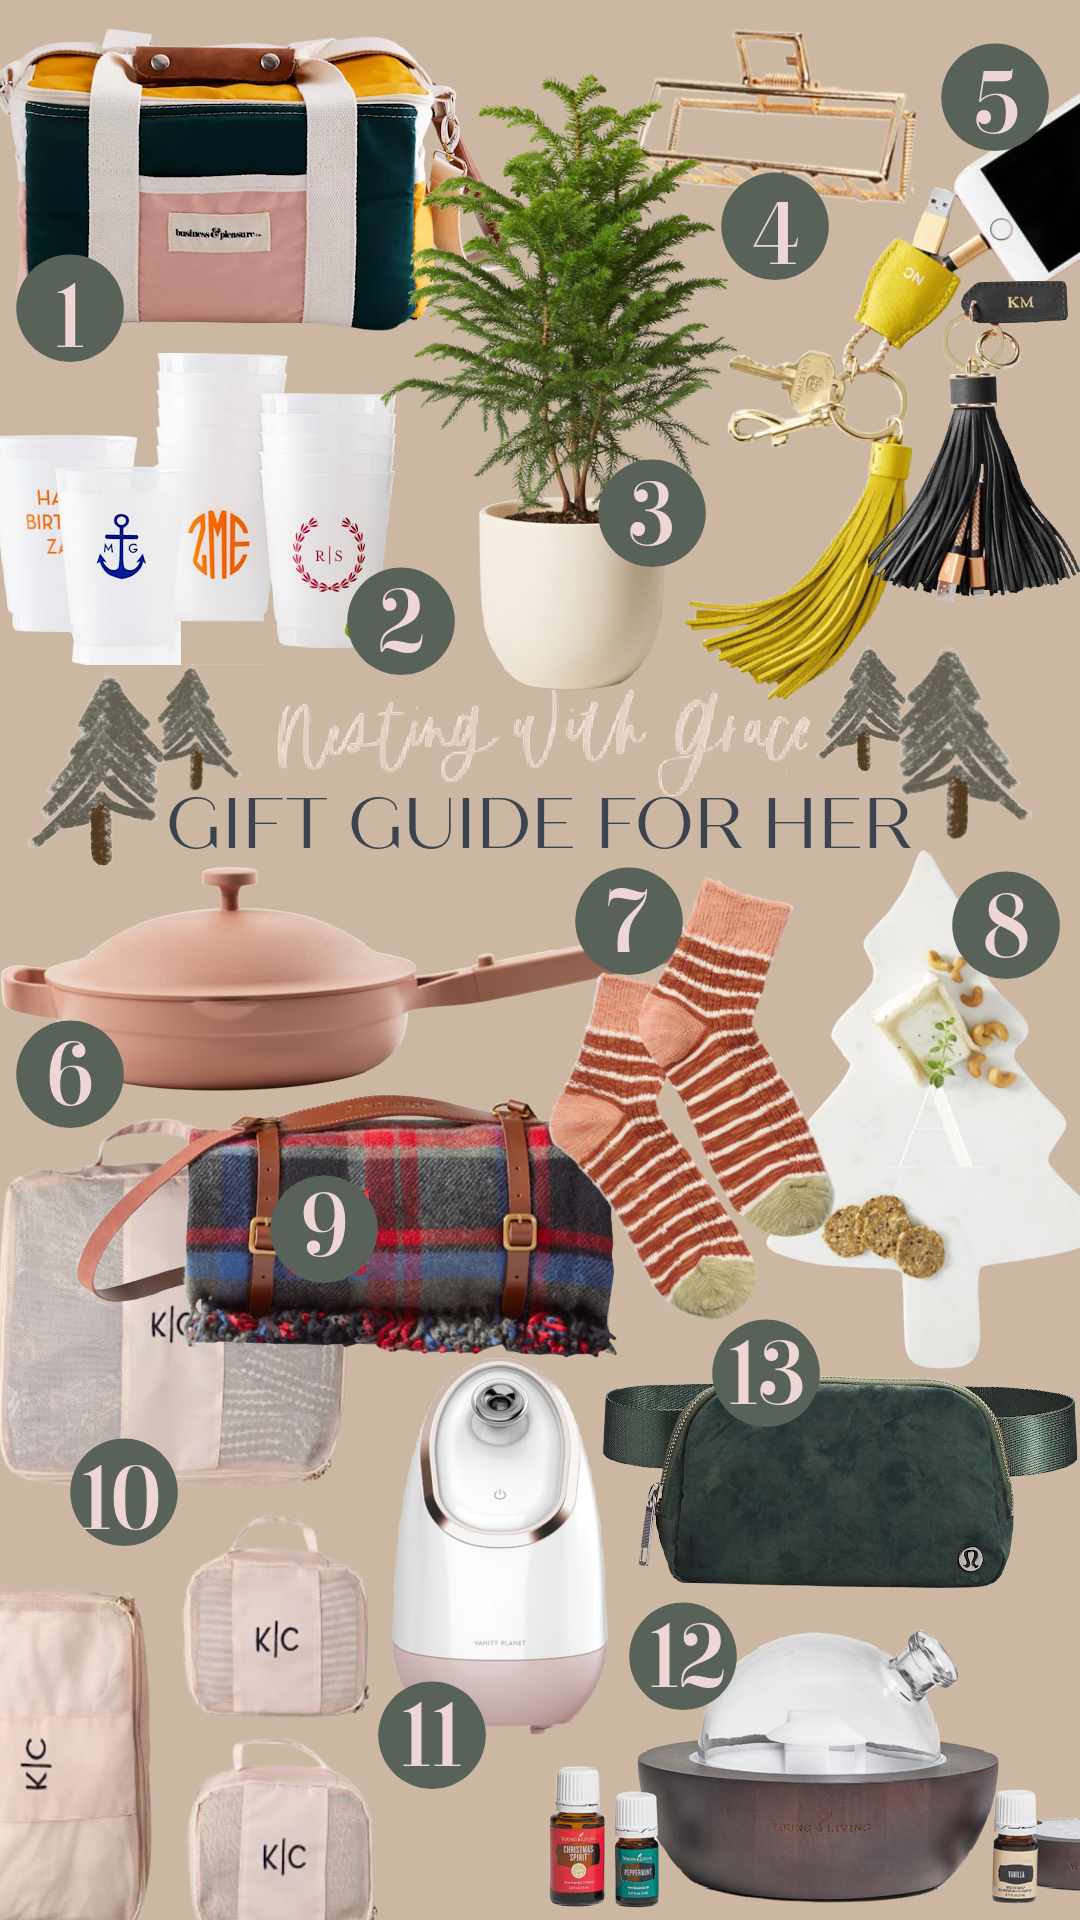 Great Gifts Under $100 - Good Day Gracie